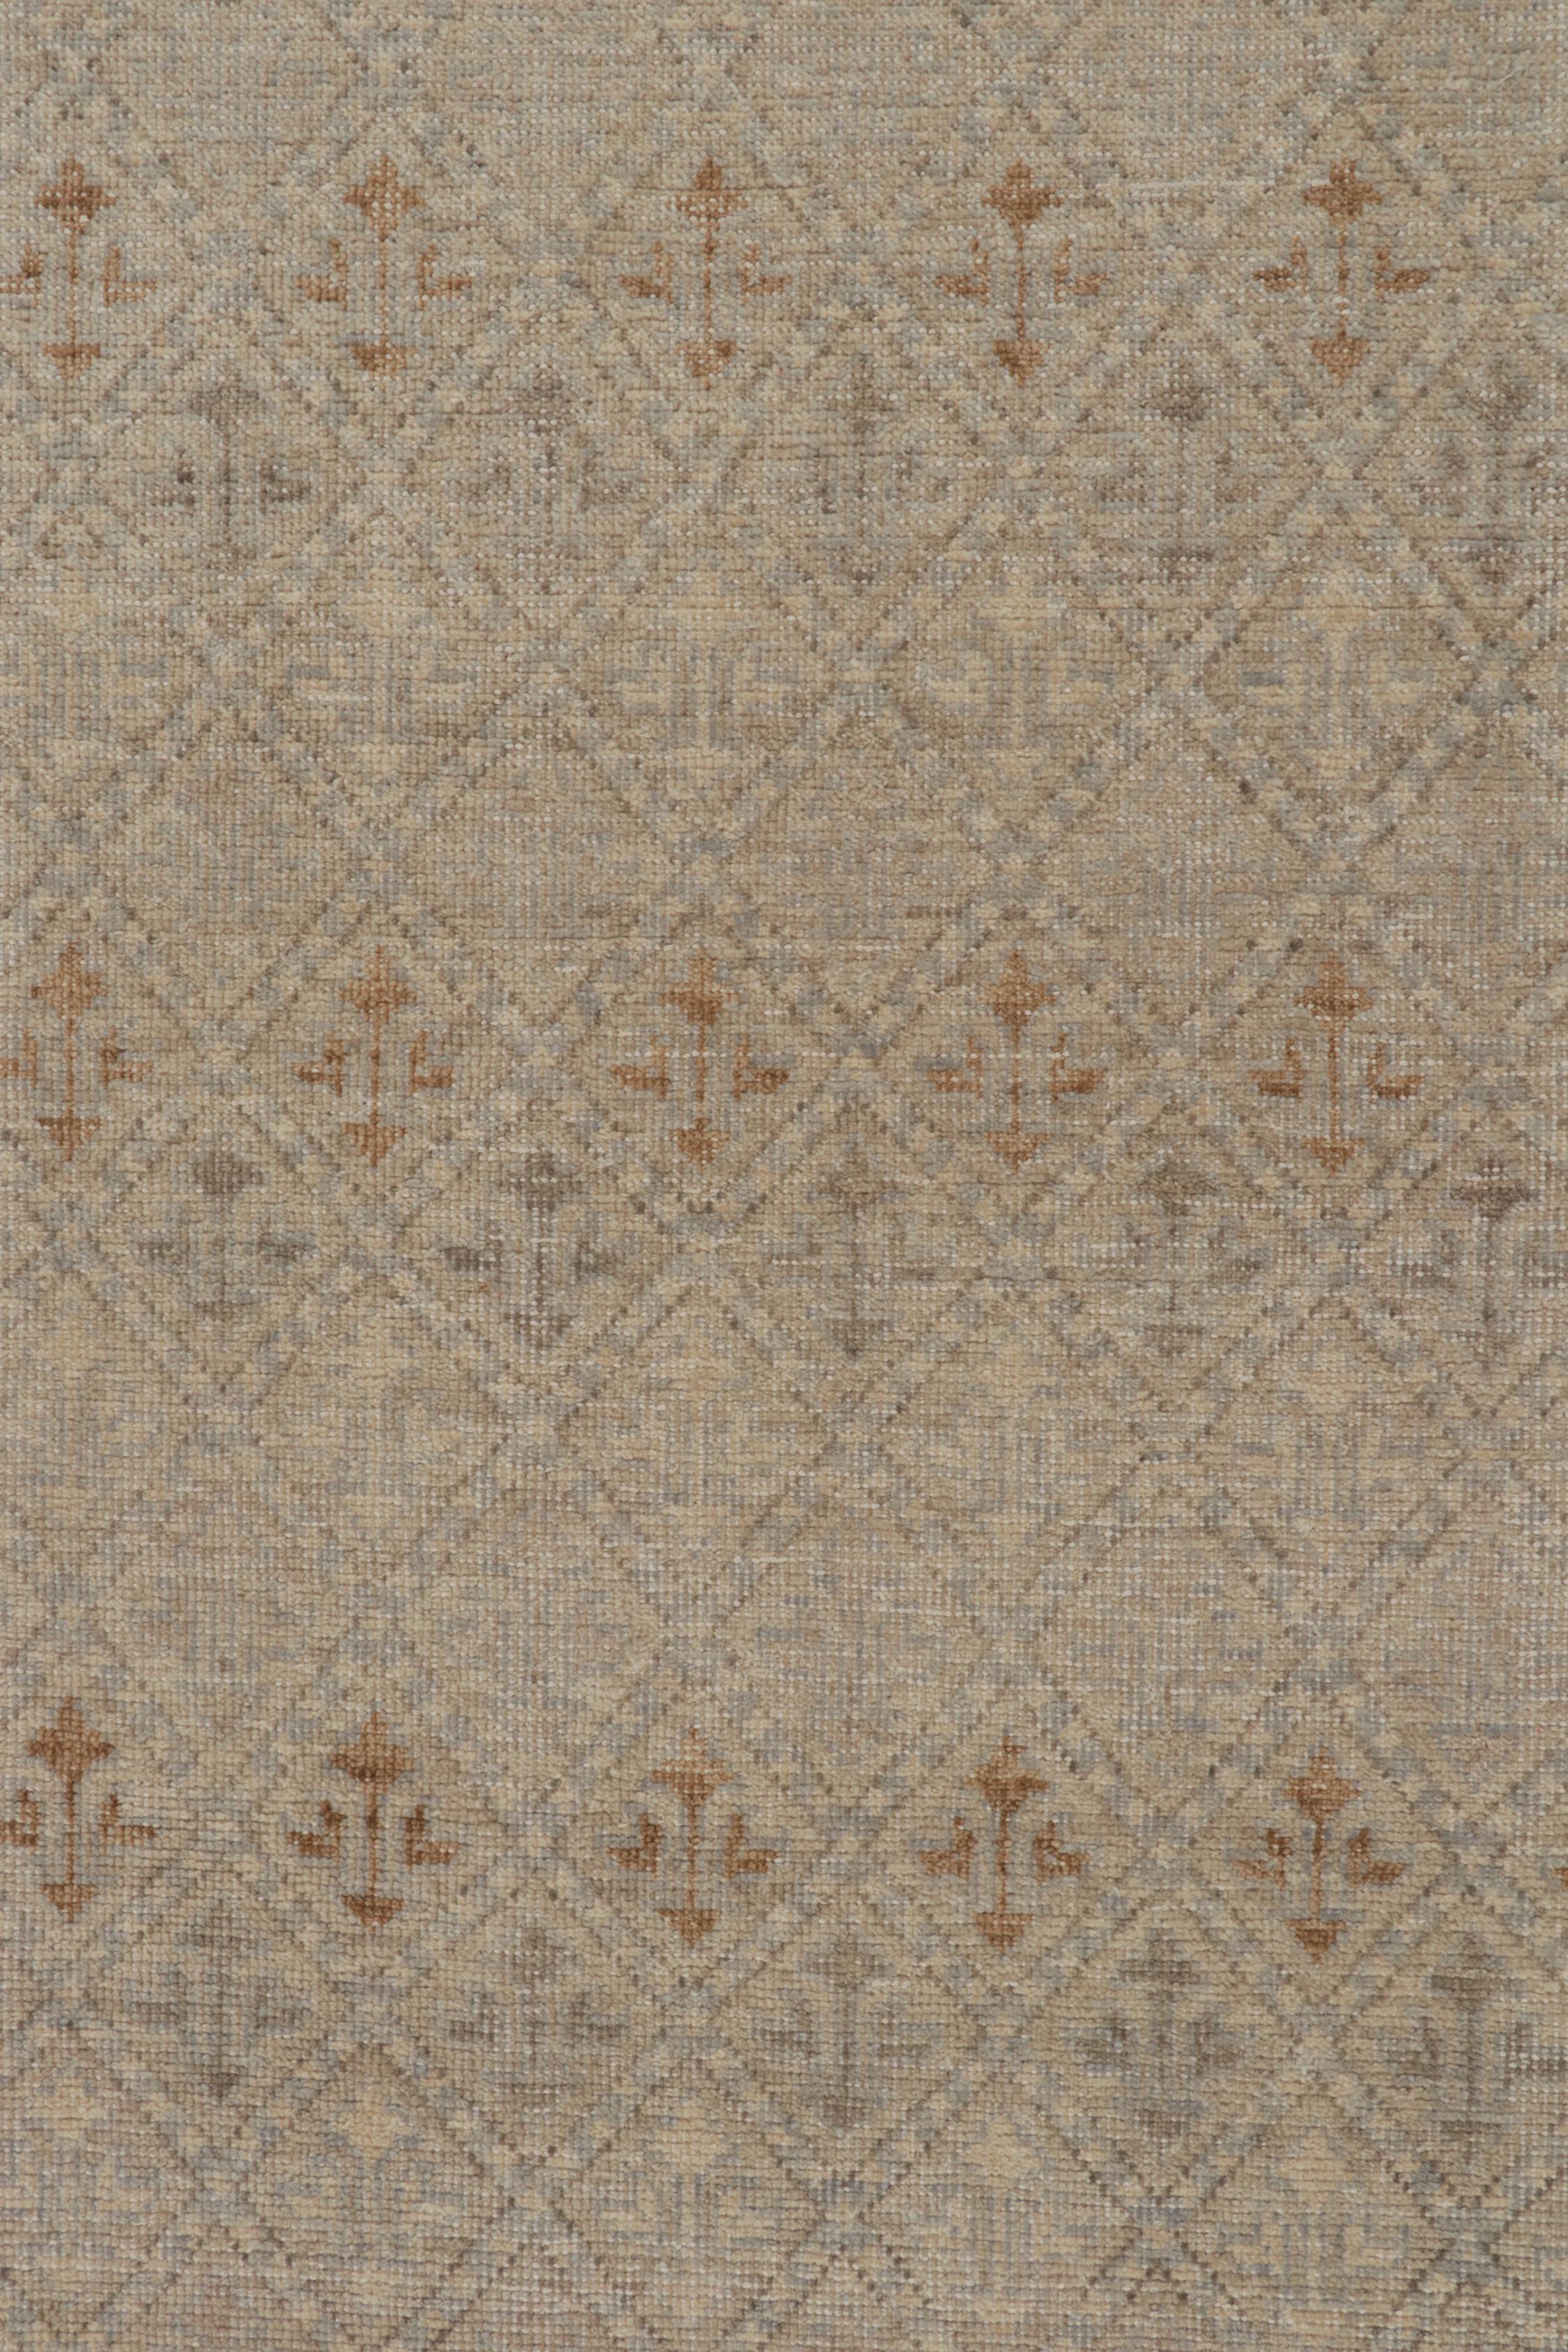 Contemporary Rug & Kilim’s Distressed Style Rug in Beige, Grey and Blue Geometric Pattern For Sale